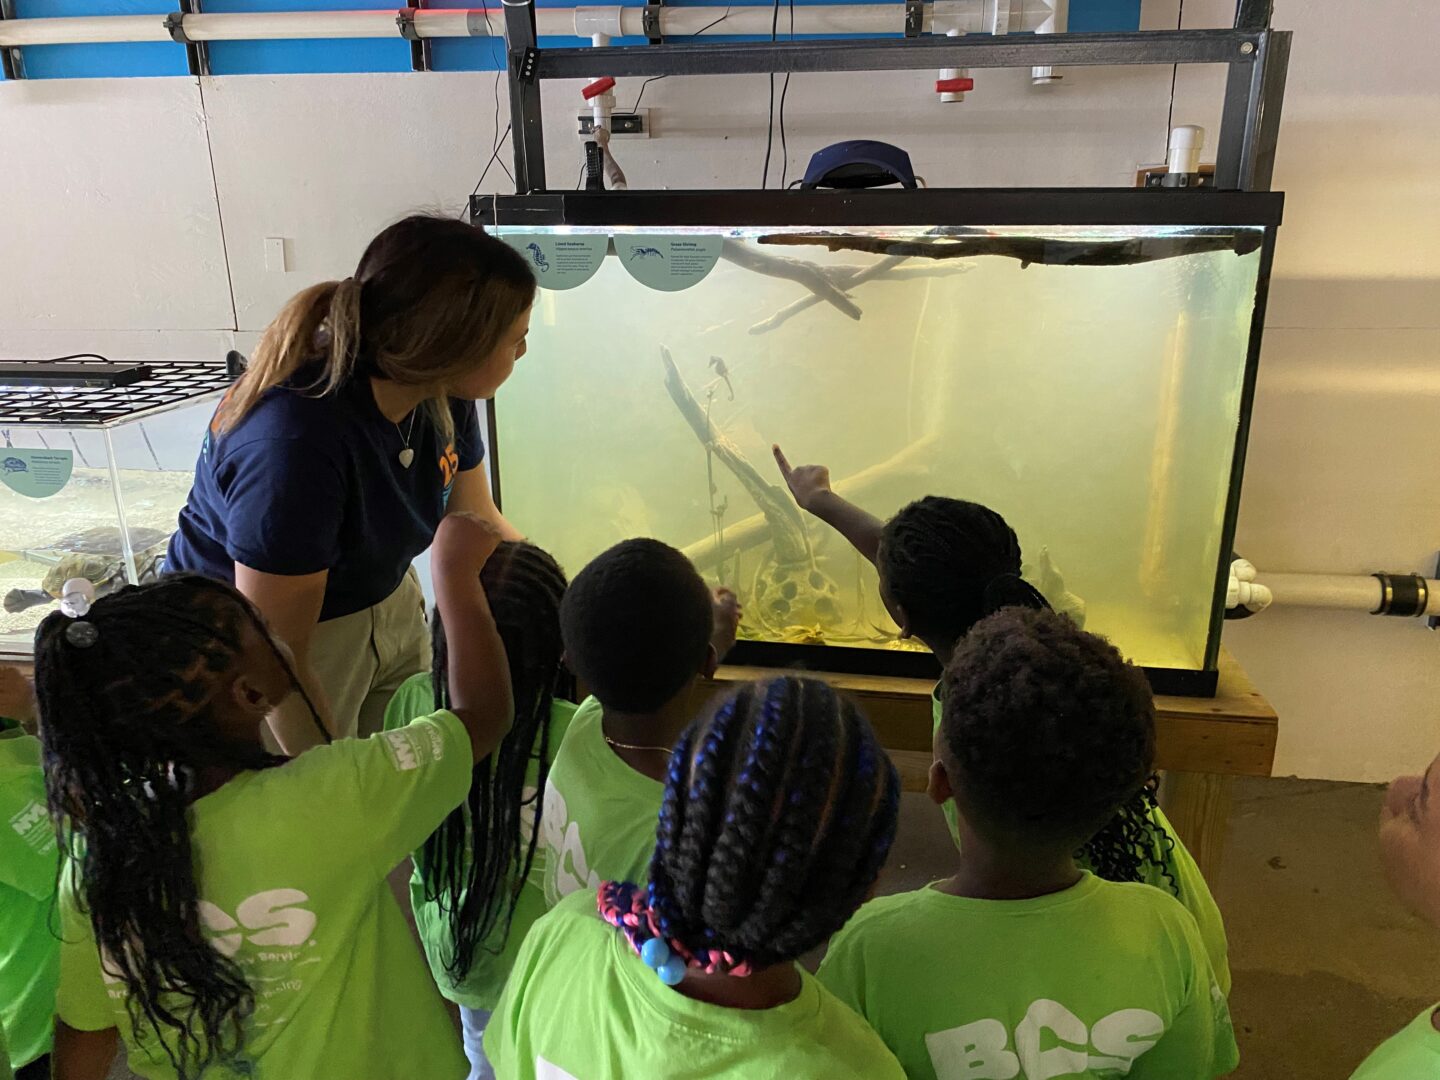 An HRPK River Project staffer teaches students about the wildlife living in an aquarium tank at the Pier 40 Wetlab